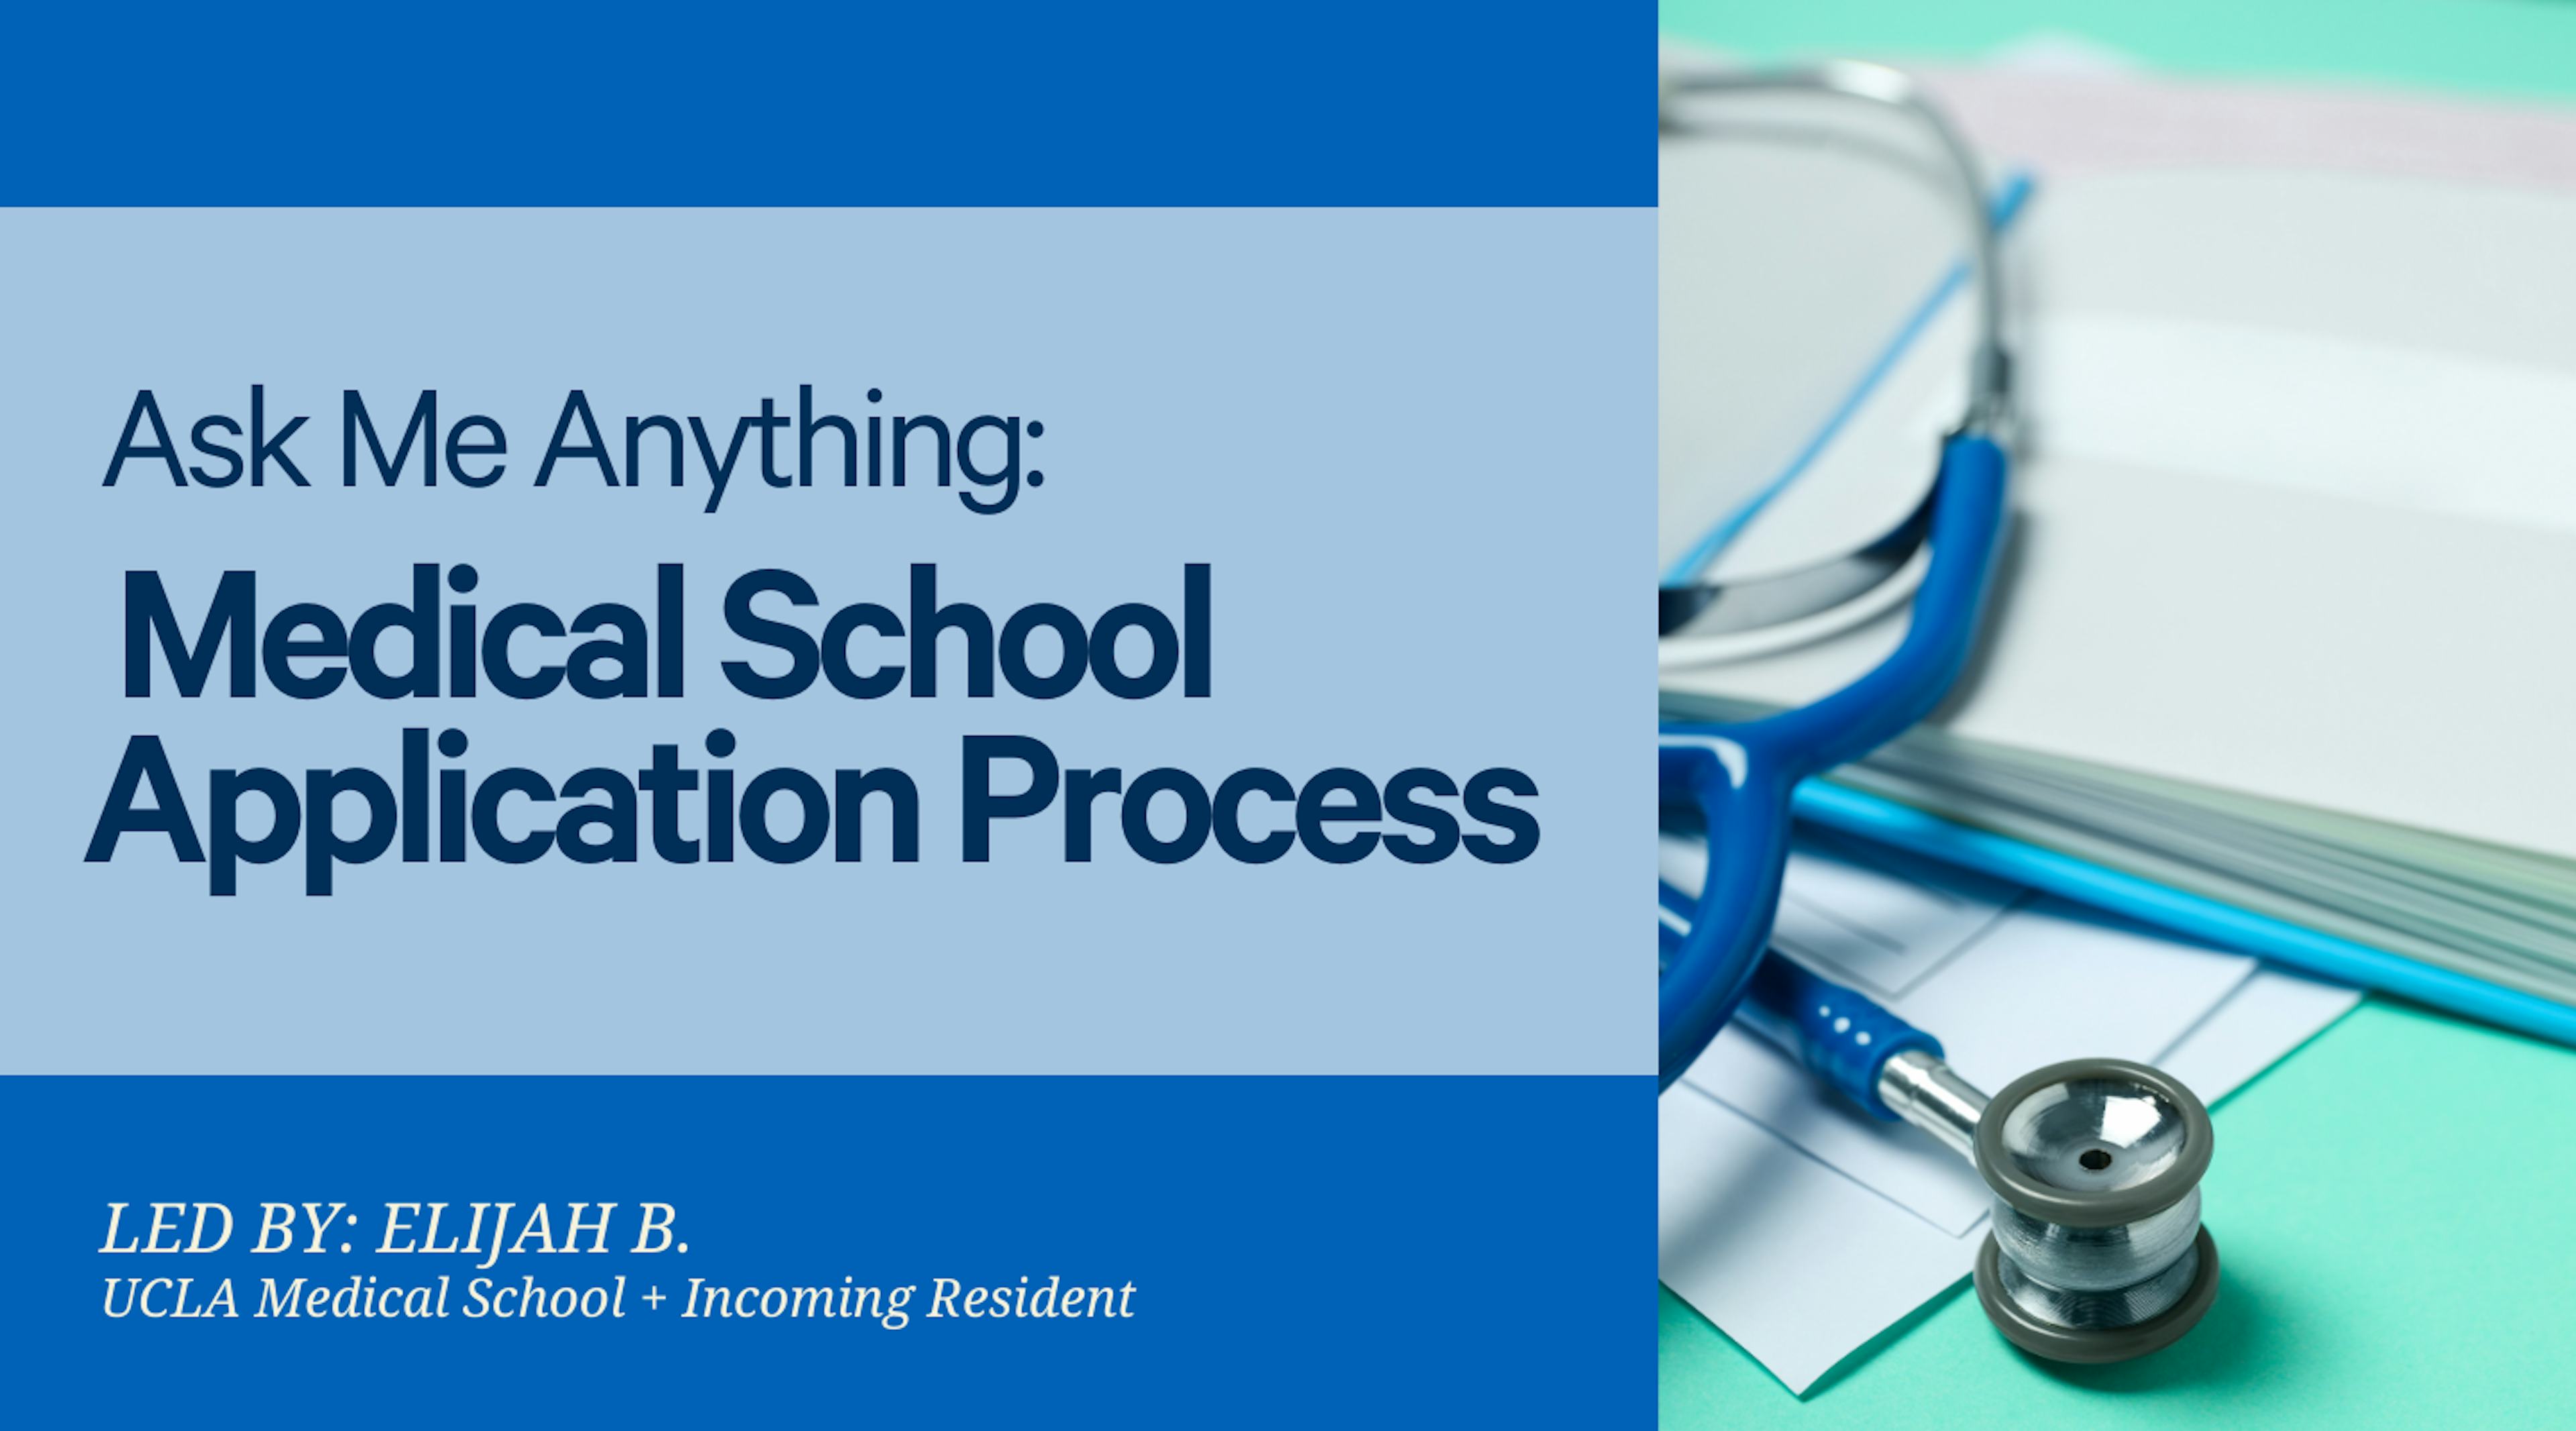 Ask Me Anything: Medical School Application Process